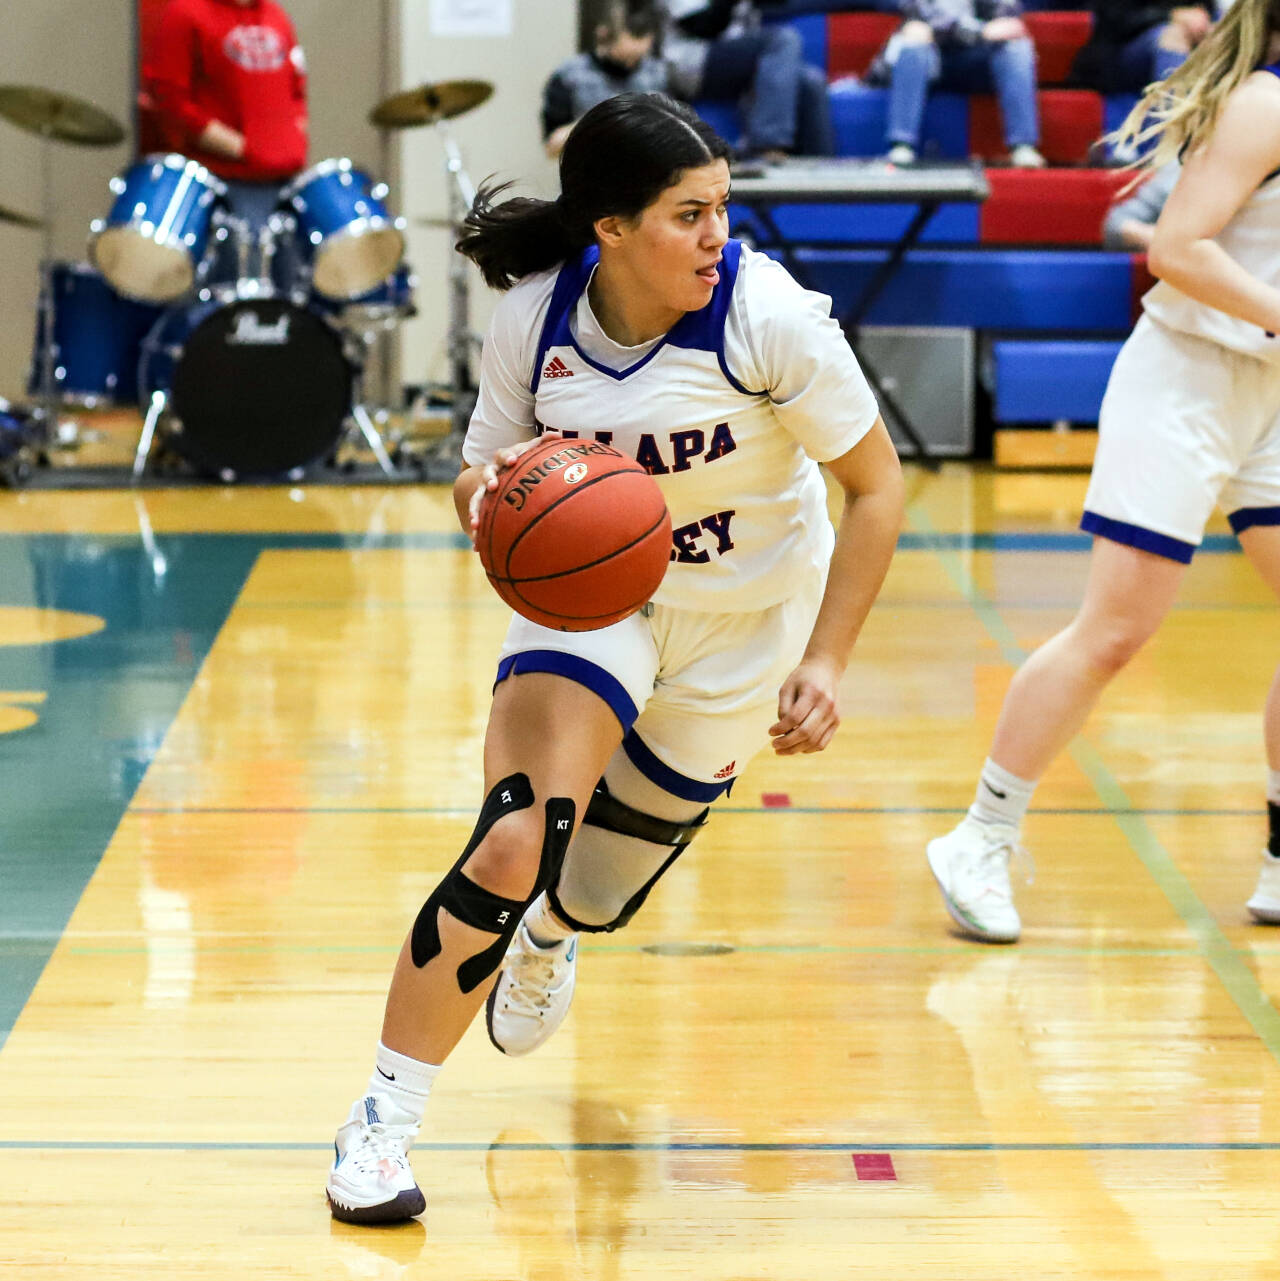 PHOTO BY LARRY BALE
Willapa Valley senior Lanissa Amacher was named to the 1B Columbia Valley League's First Team after leading the Vikings with 14.3 points per game this season.